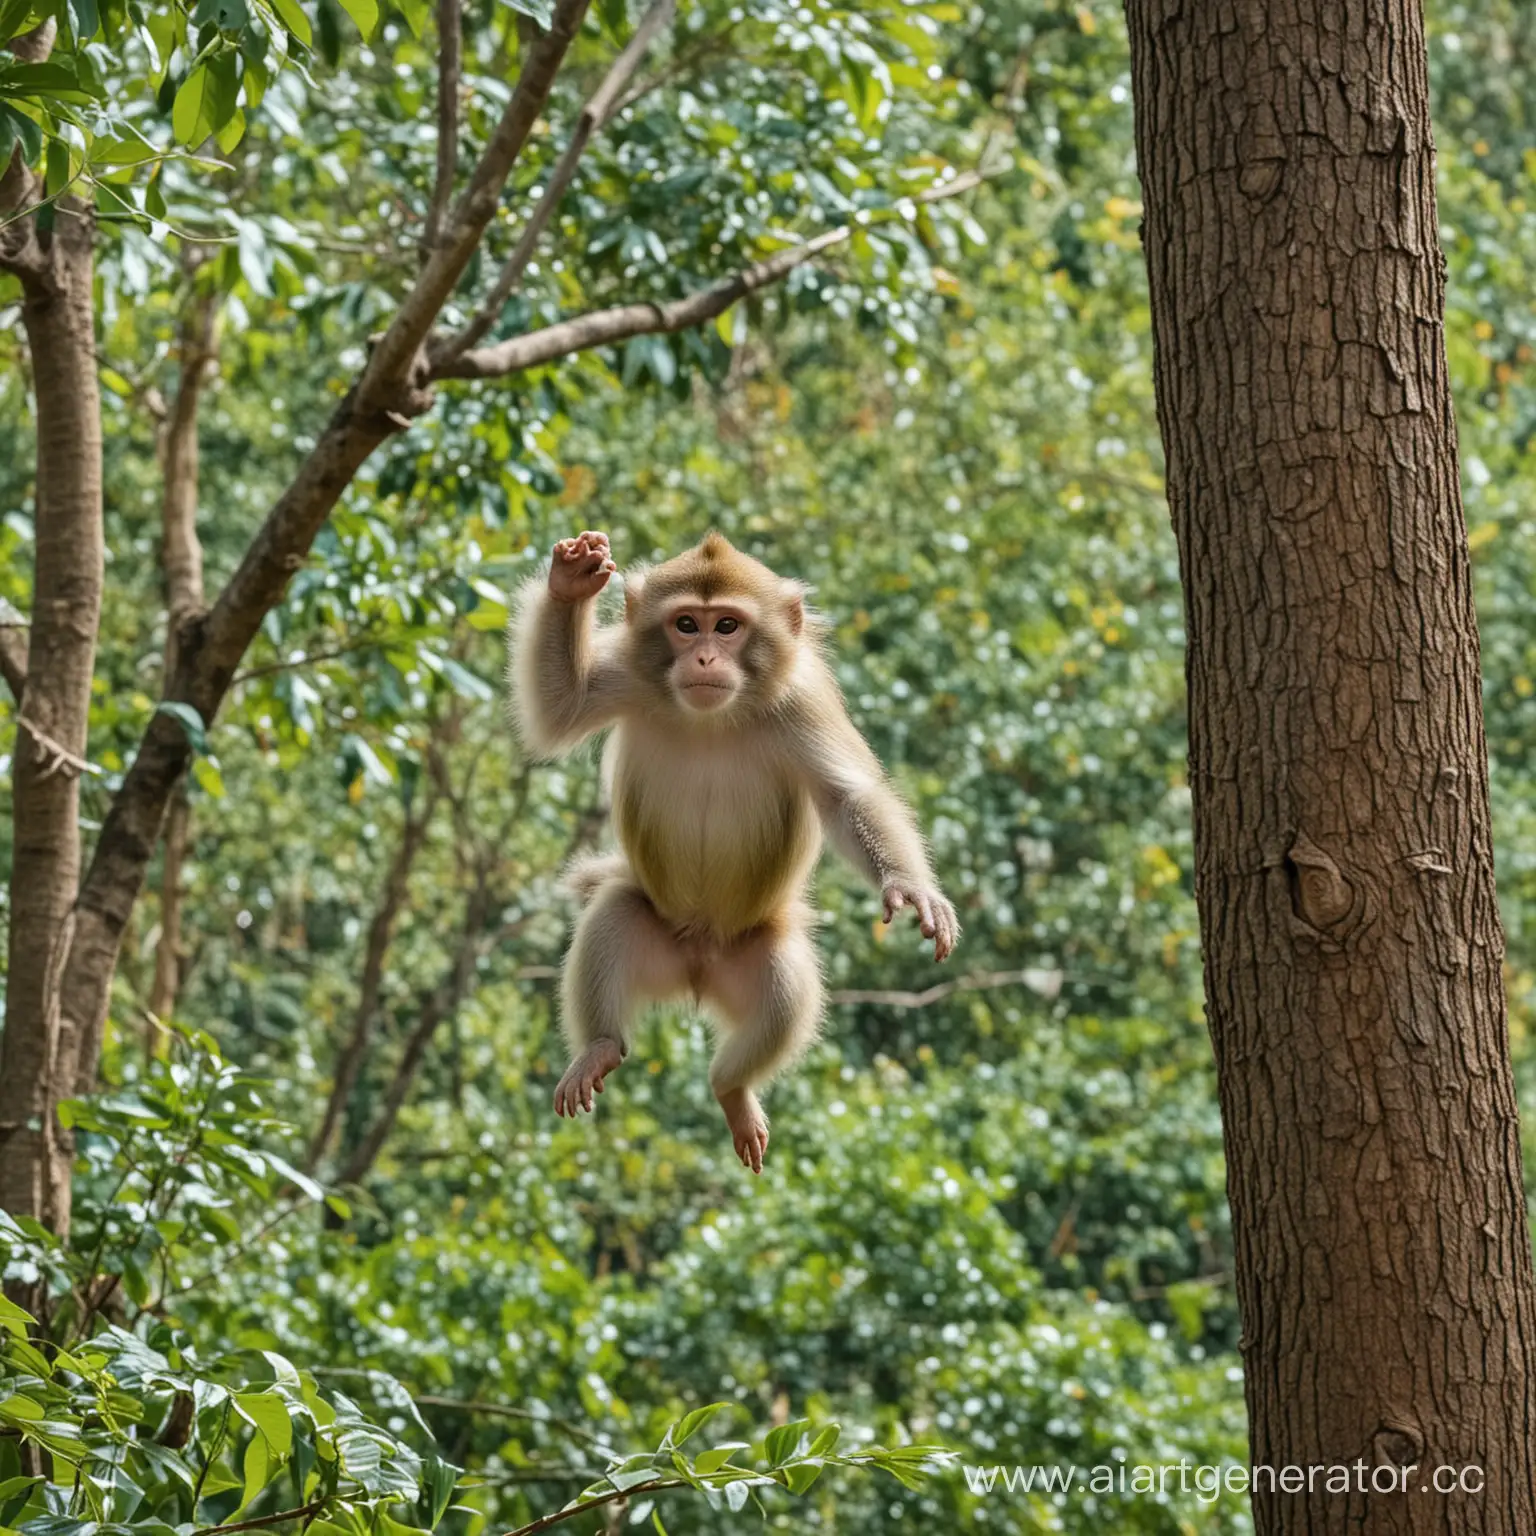 Playful-Monkey-Leaping-Among-Lush-Forest-Canopy